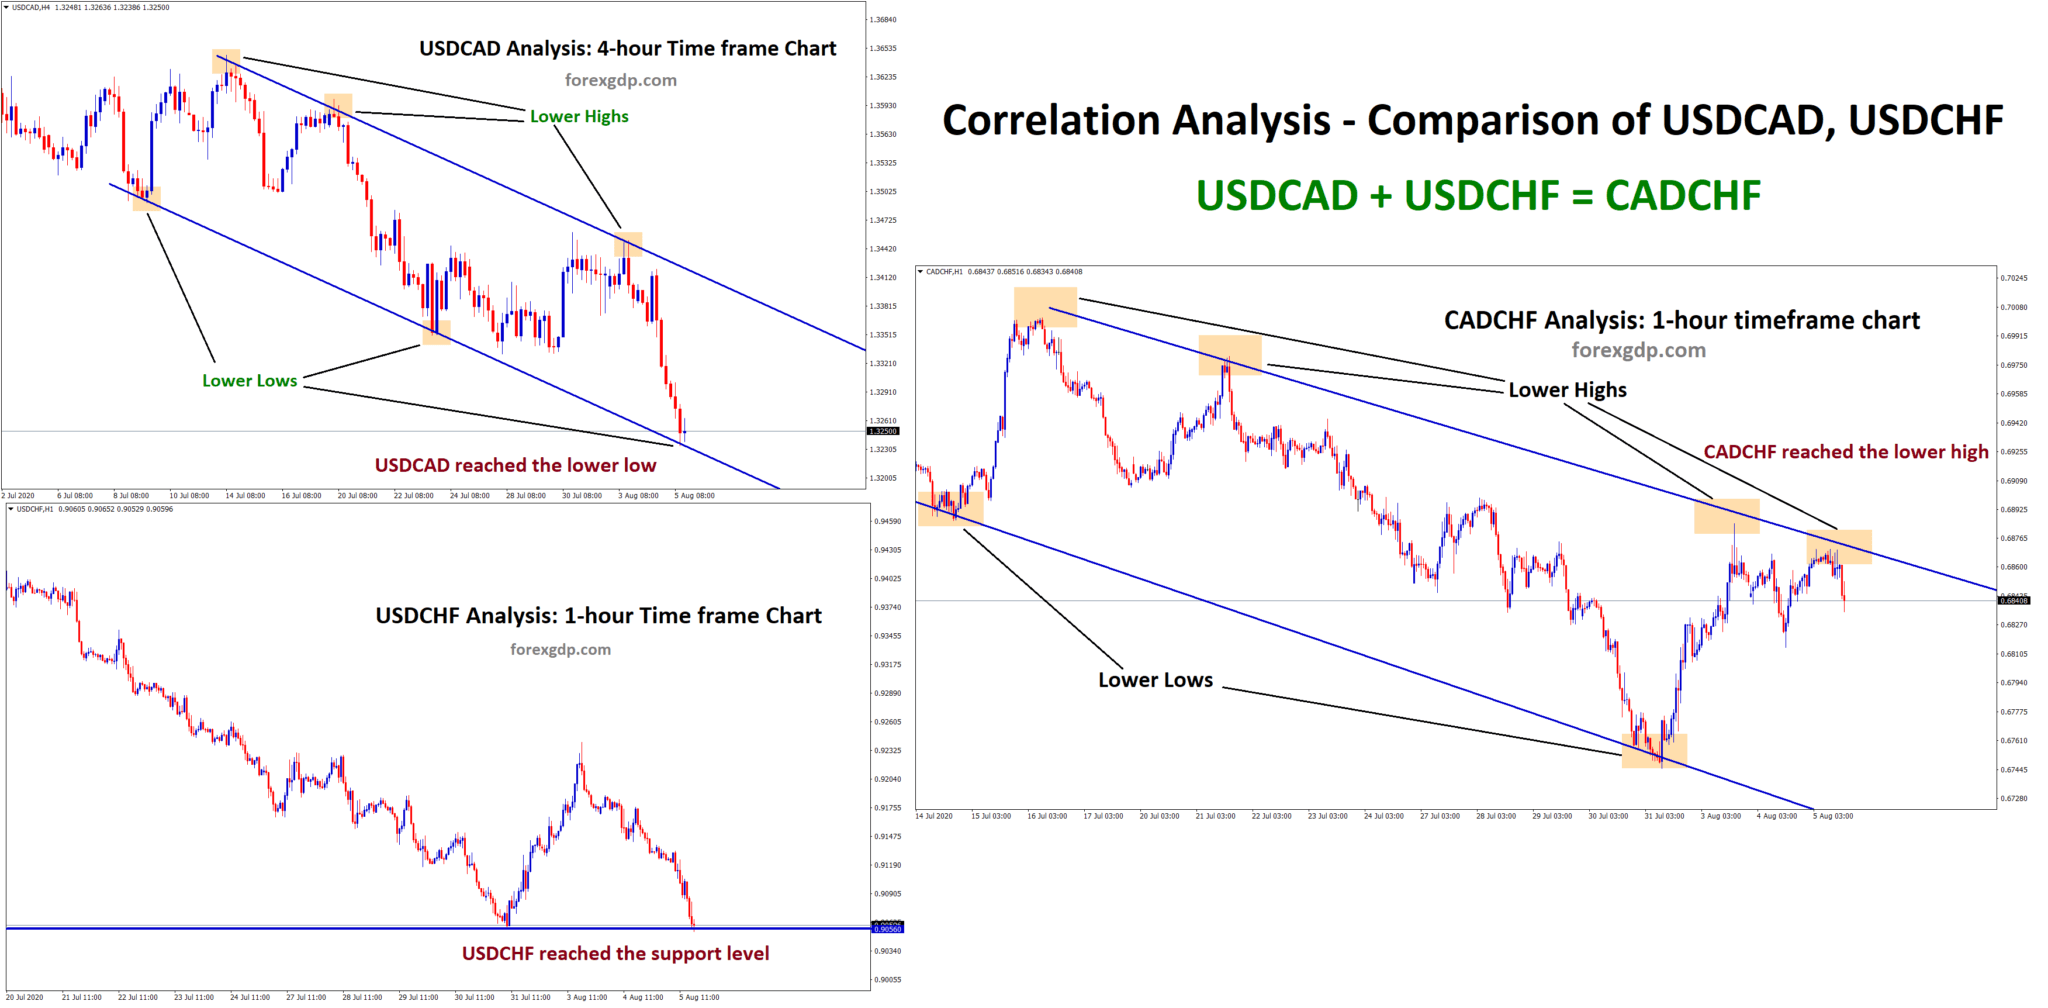 Correlation analysis on CADCHF currency pair